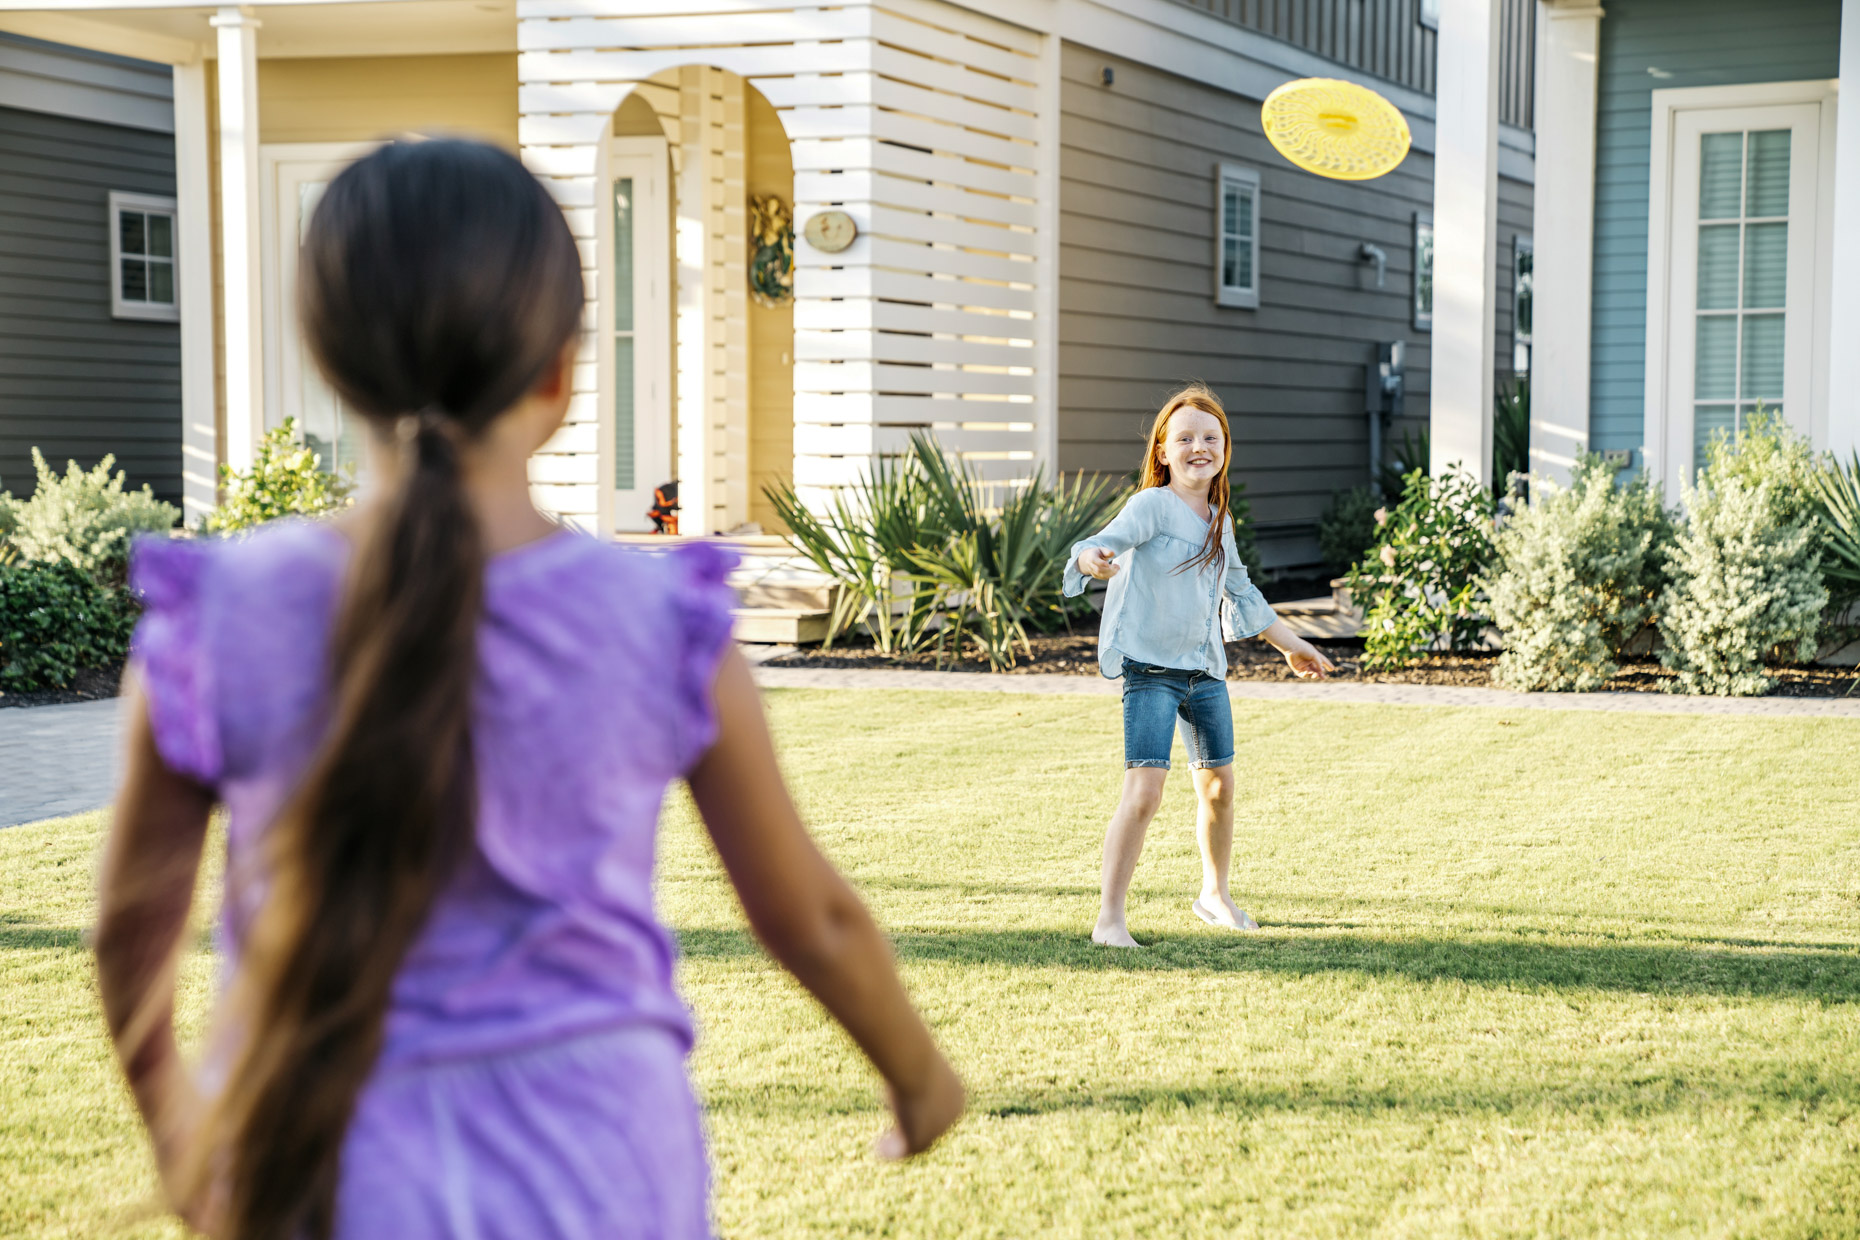 Girls playing with frisbee in yard